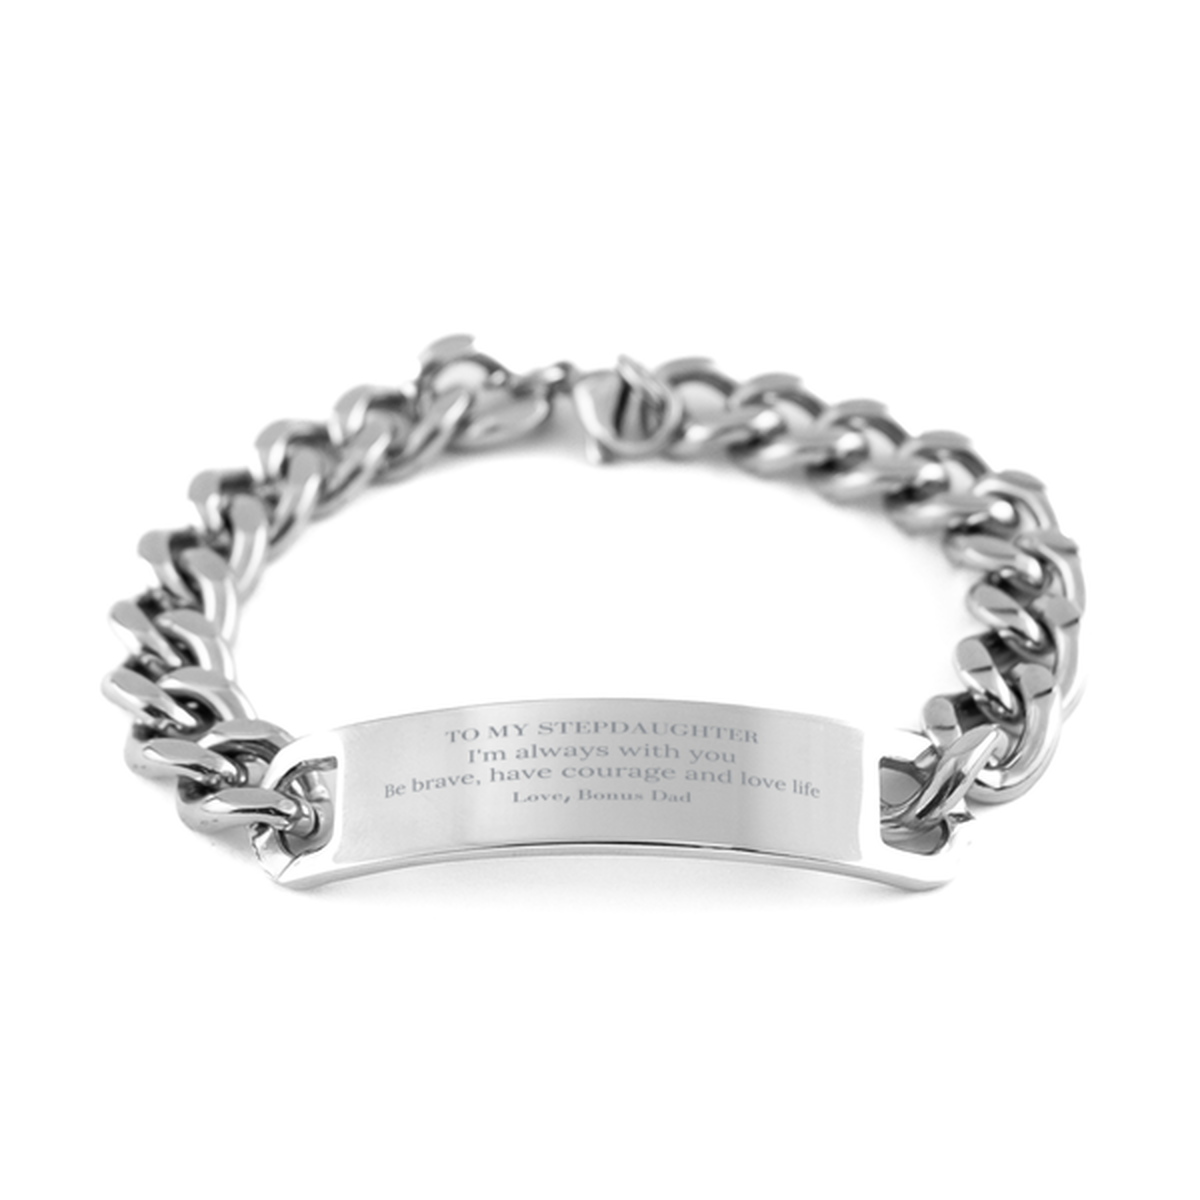 To My Stepdaughter Gifts from Bonus Dad, Unique Cuban Chain Stainless Steel Bracelet Inspirational Christmas Birthday Graduation Gifts for Stepdaughter I'm always with you. Be brave, have courage and love life. Love, Bonus Dad